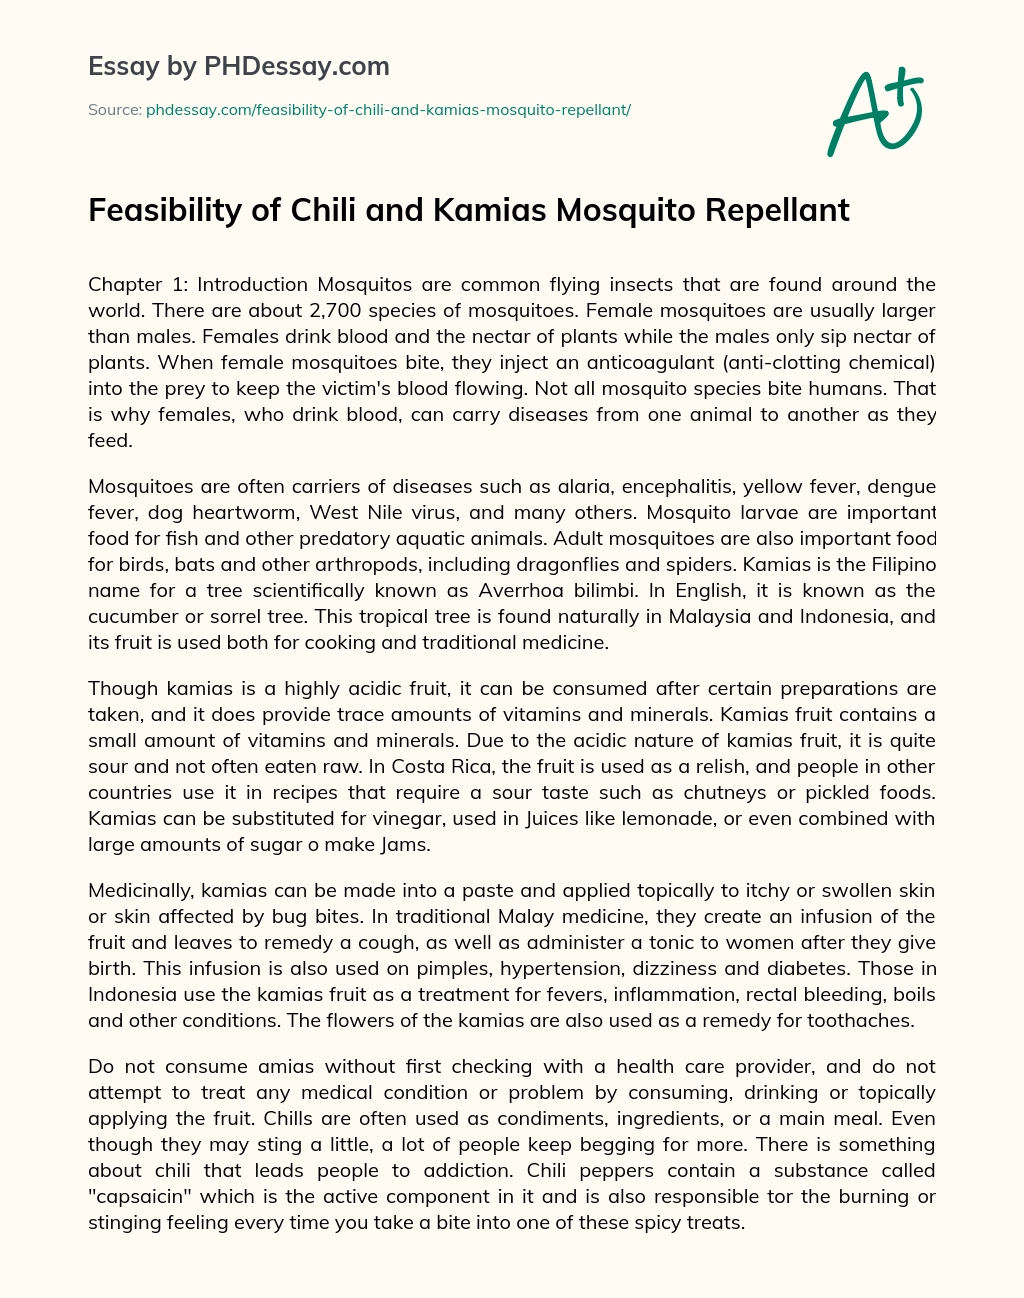 Feasibility of Chili and Kamias Mosquito Repellant essay